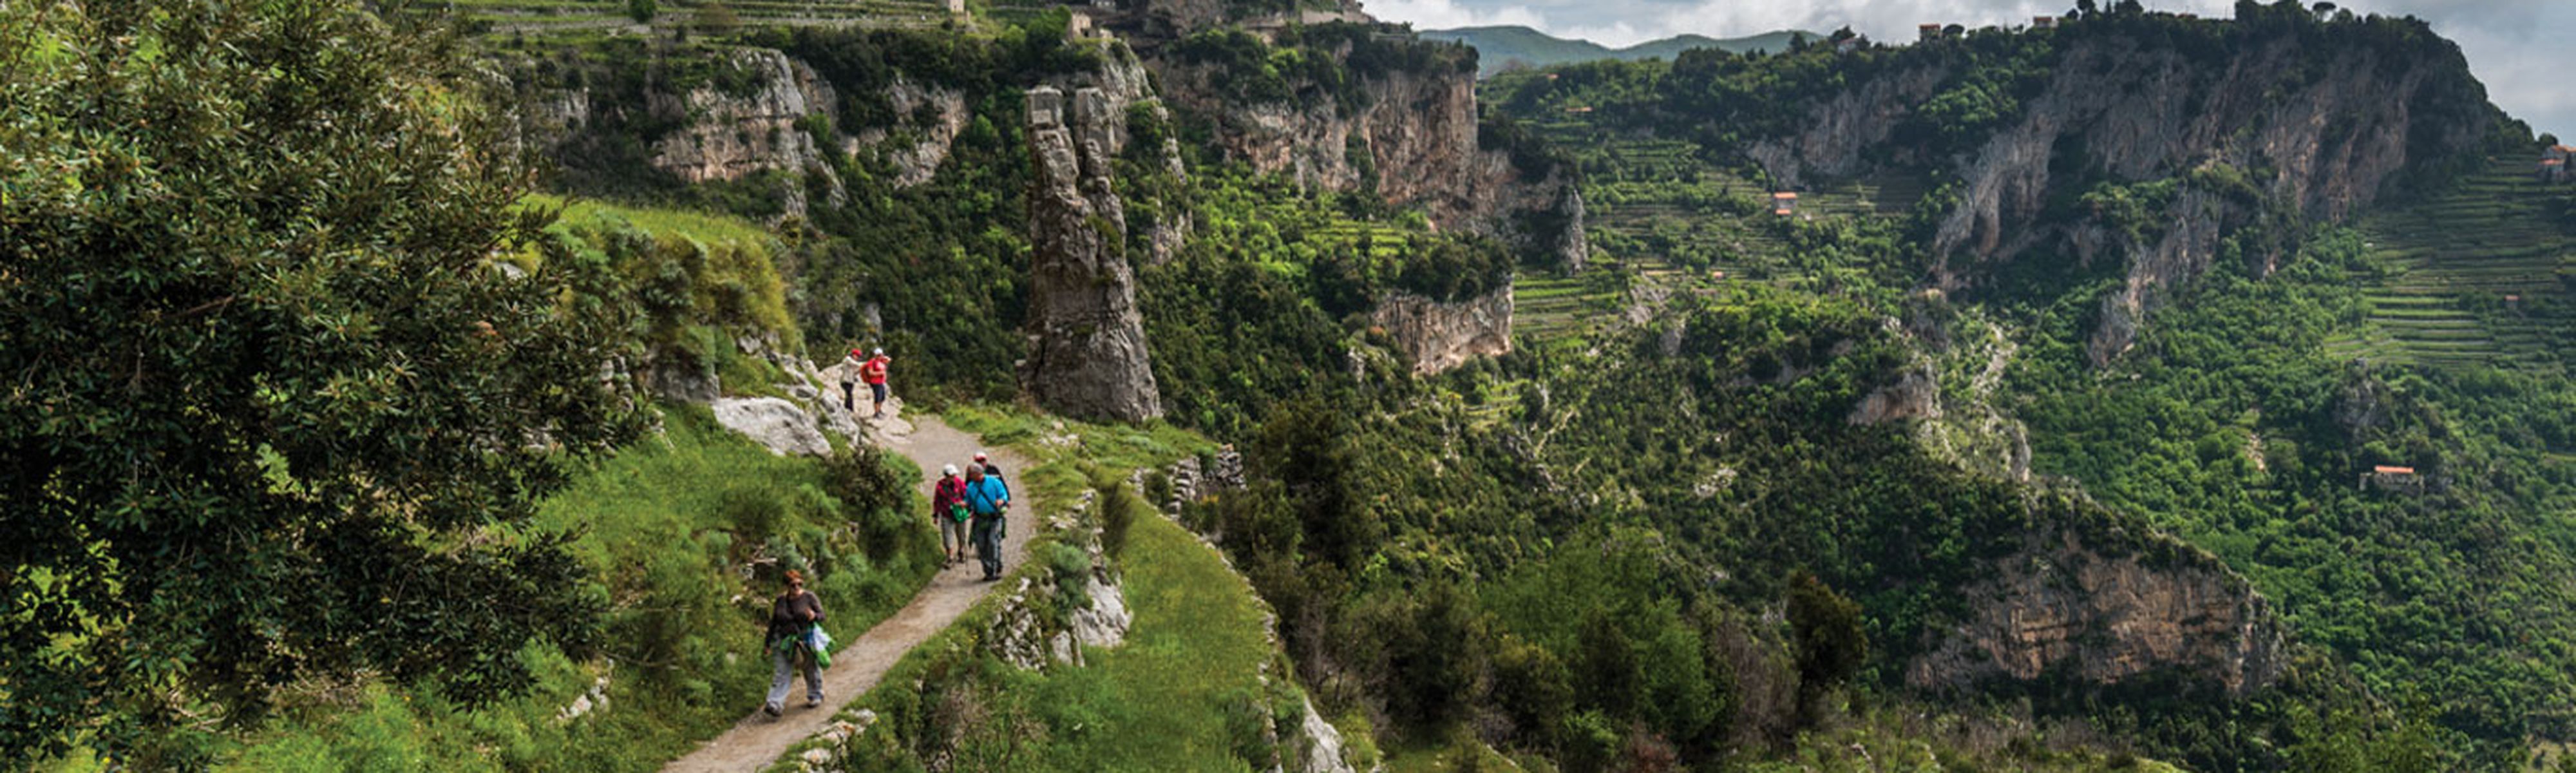 people walking along a cliff in italy